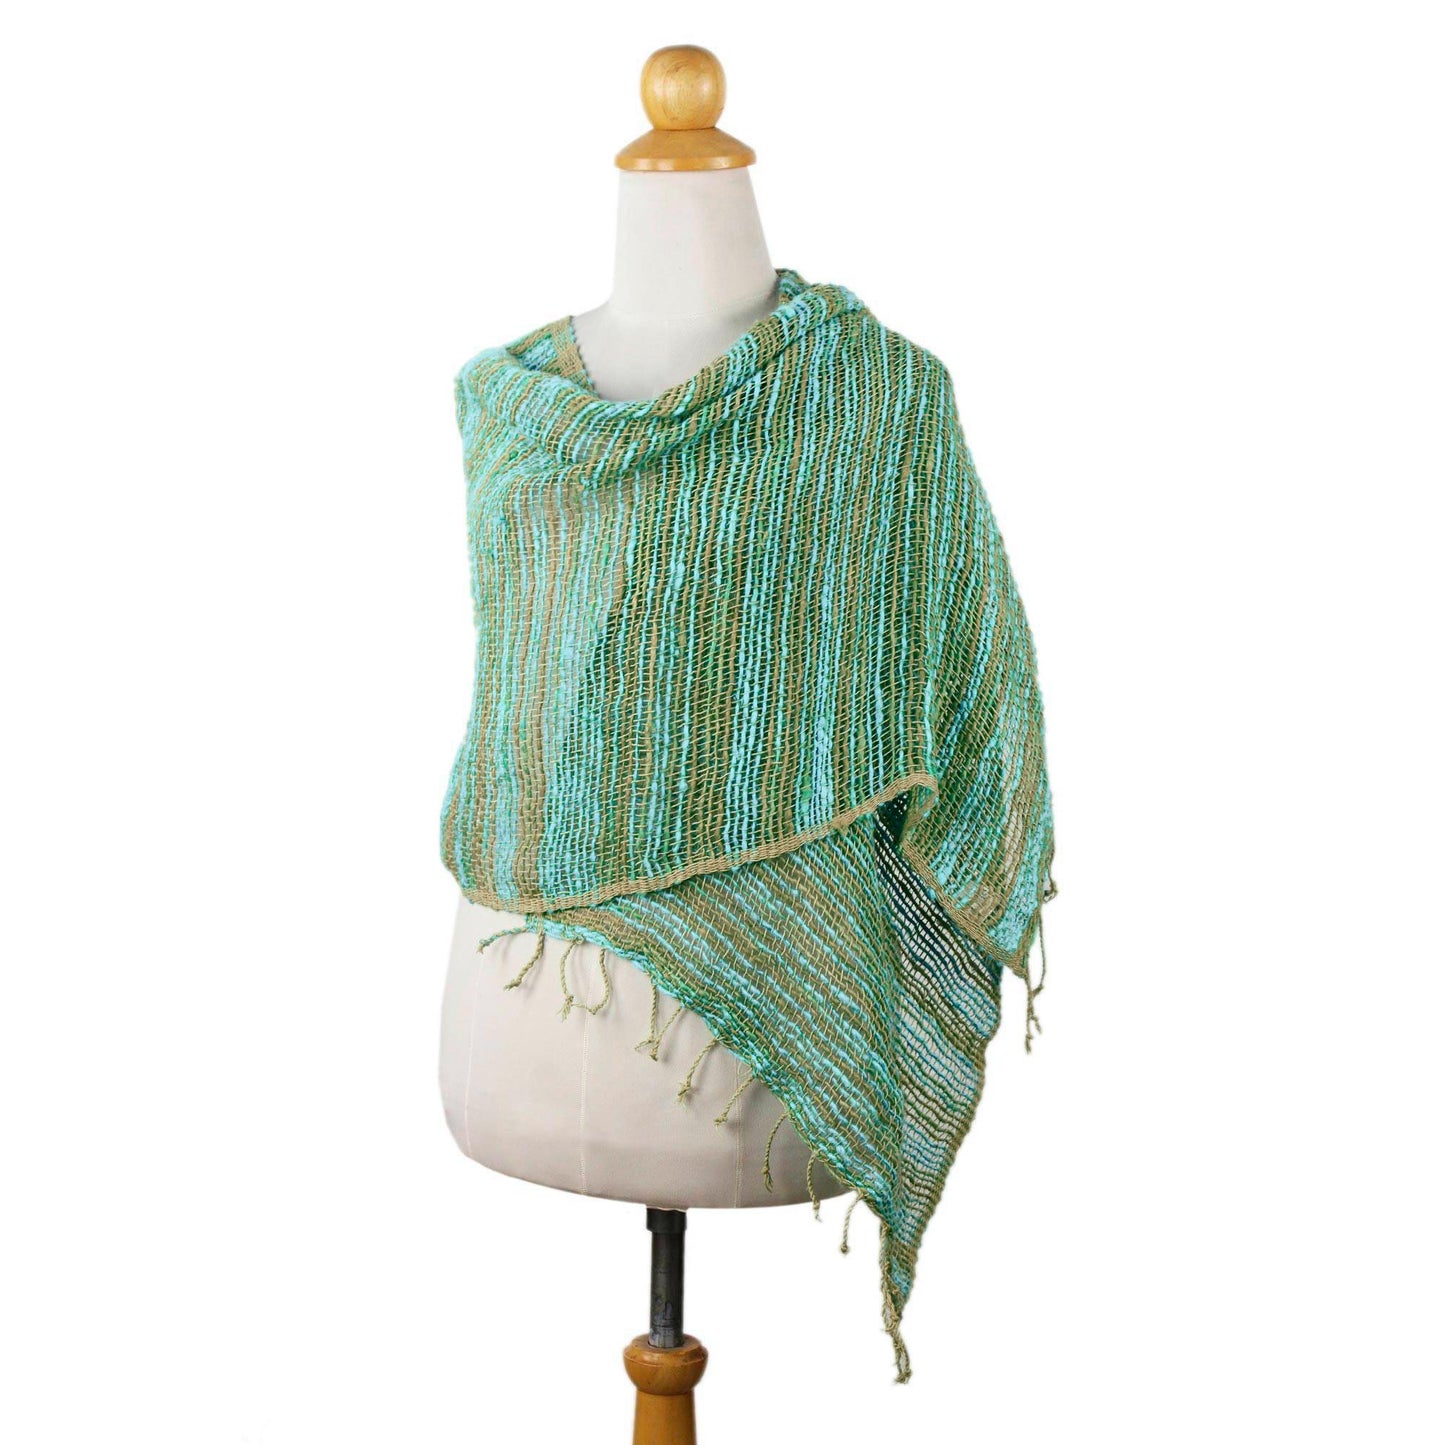 Breezy Blue and Green Thai Blue and Green Cotton Scarf